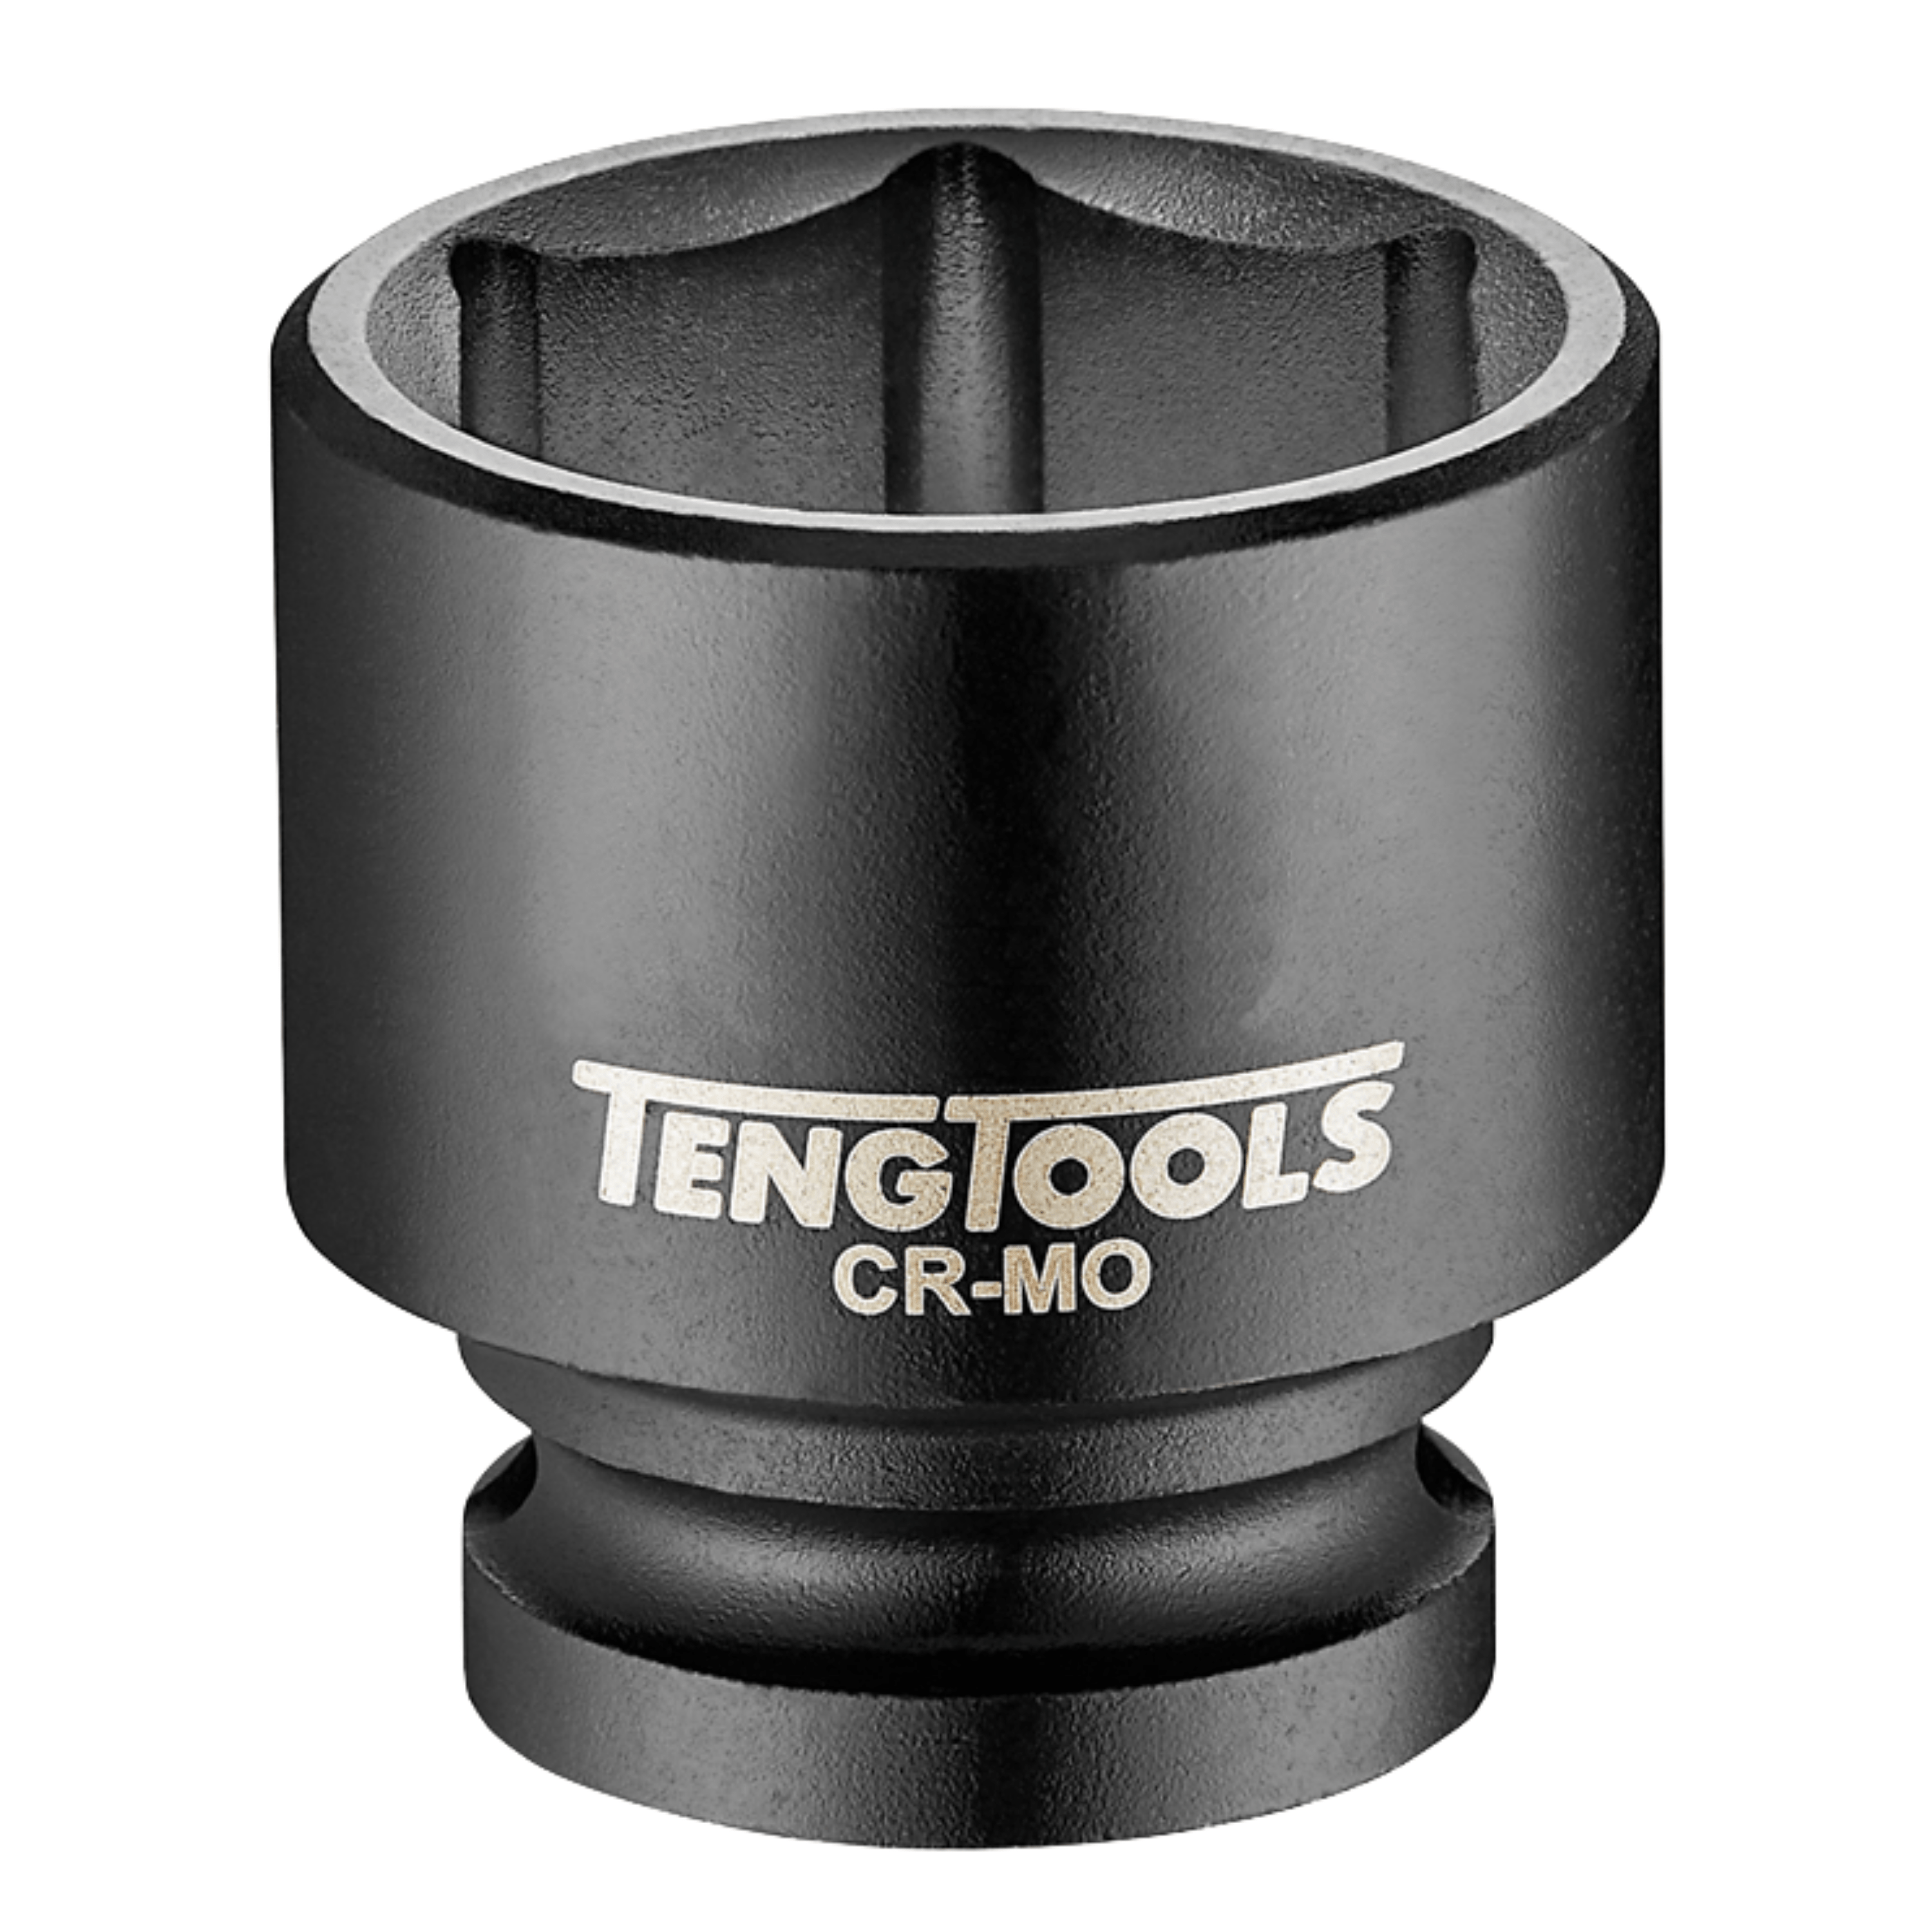 Teng Tools 1-1/2 Inch Drive 6 Point Metric Shallow Chrome Molybdenum Impact Sockets - 55mm